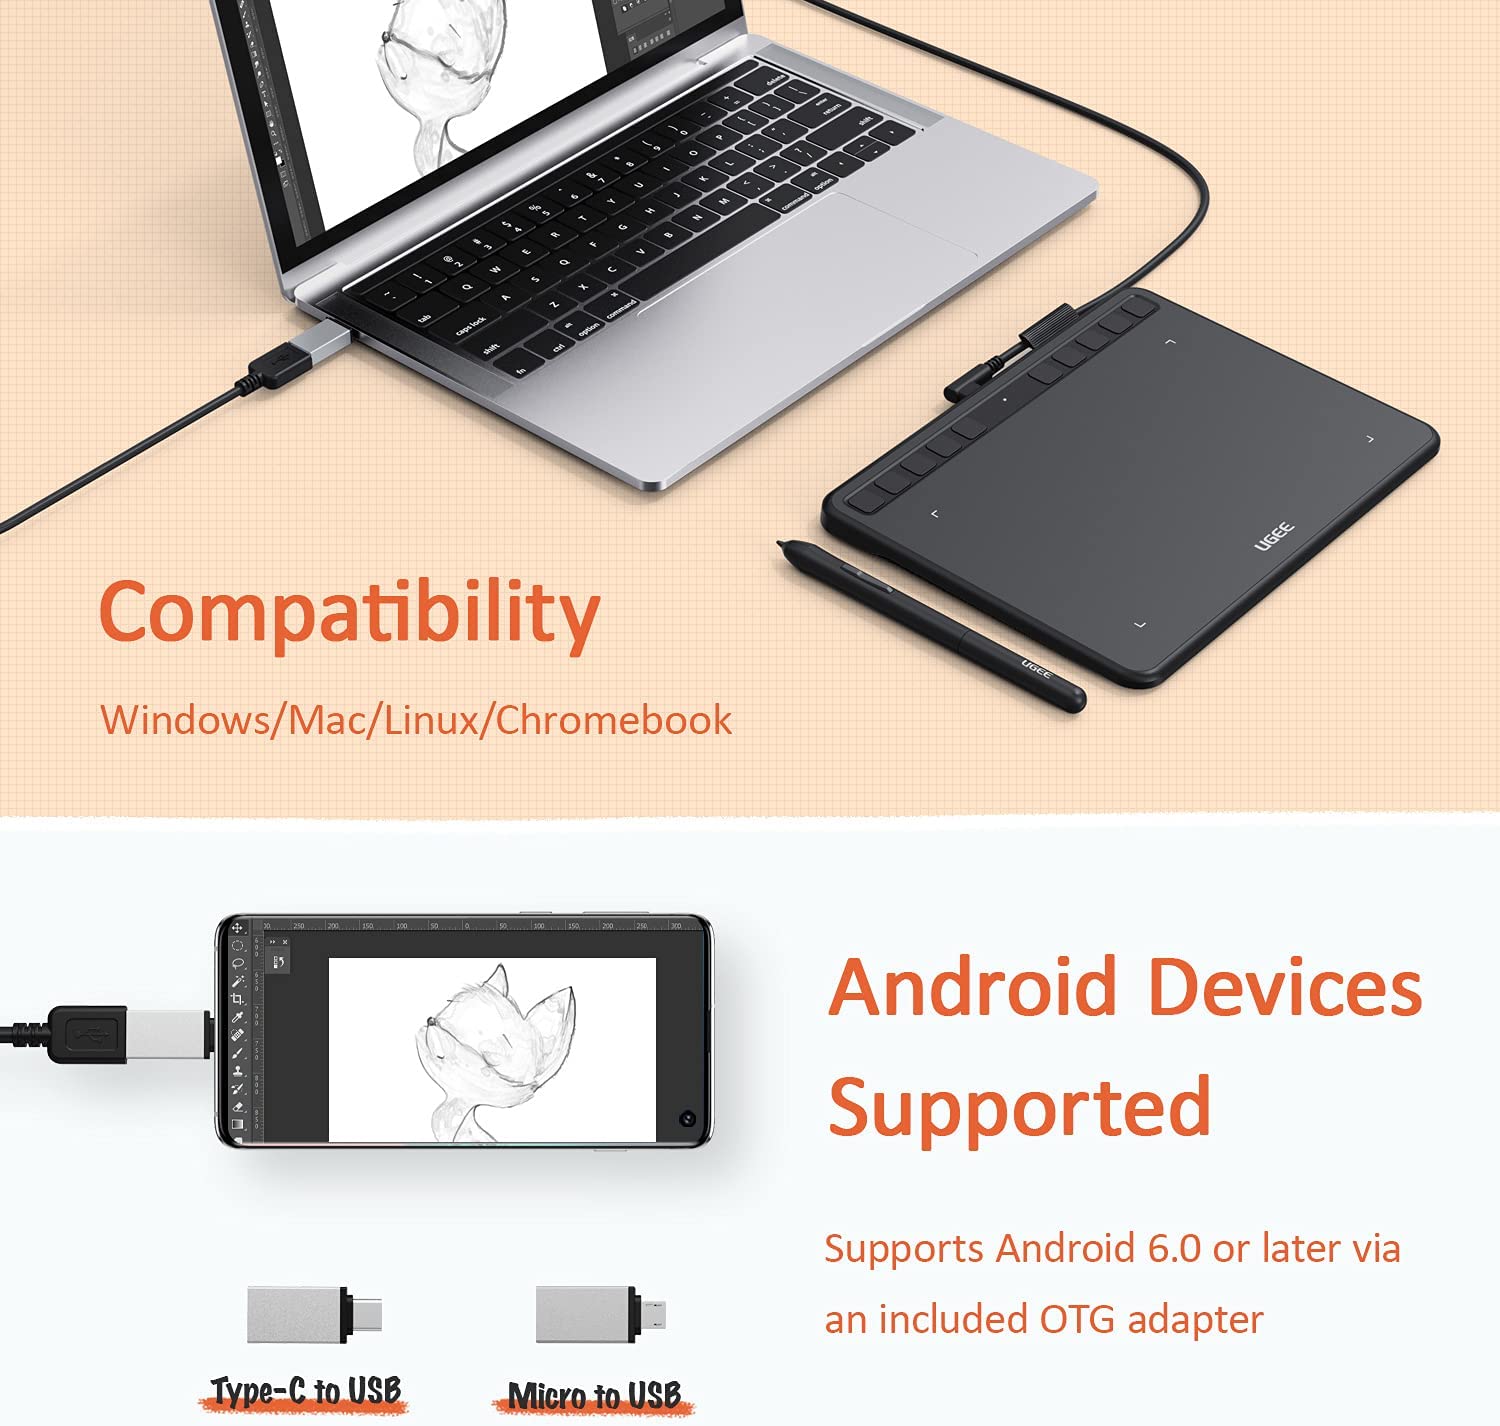 Ugee Pen Tablet S640/S640W/S1060/S1060W compatibility